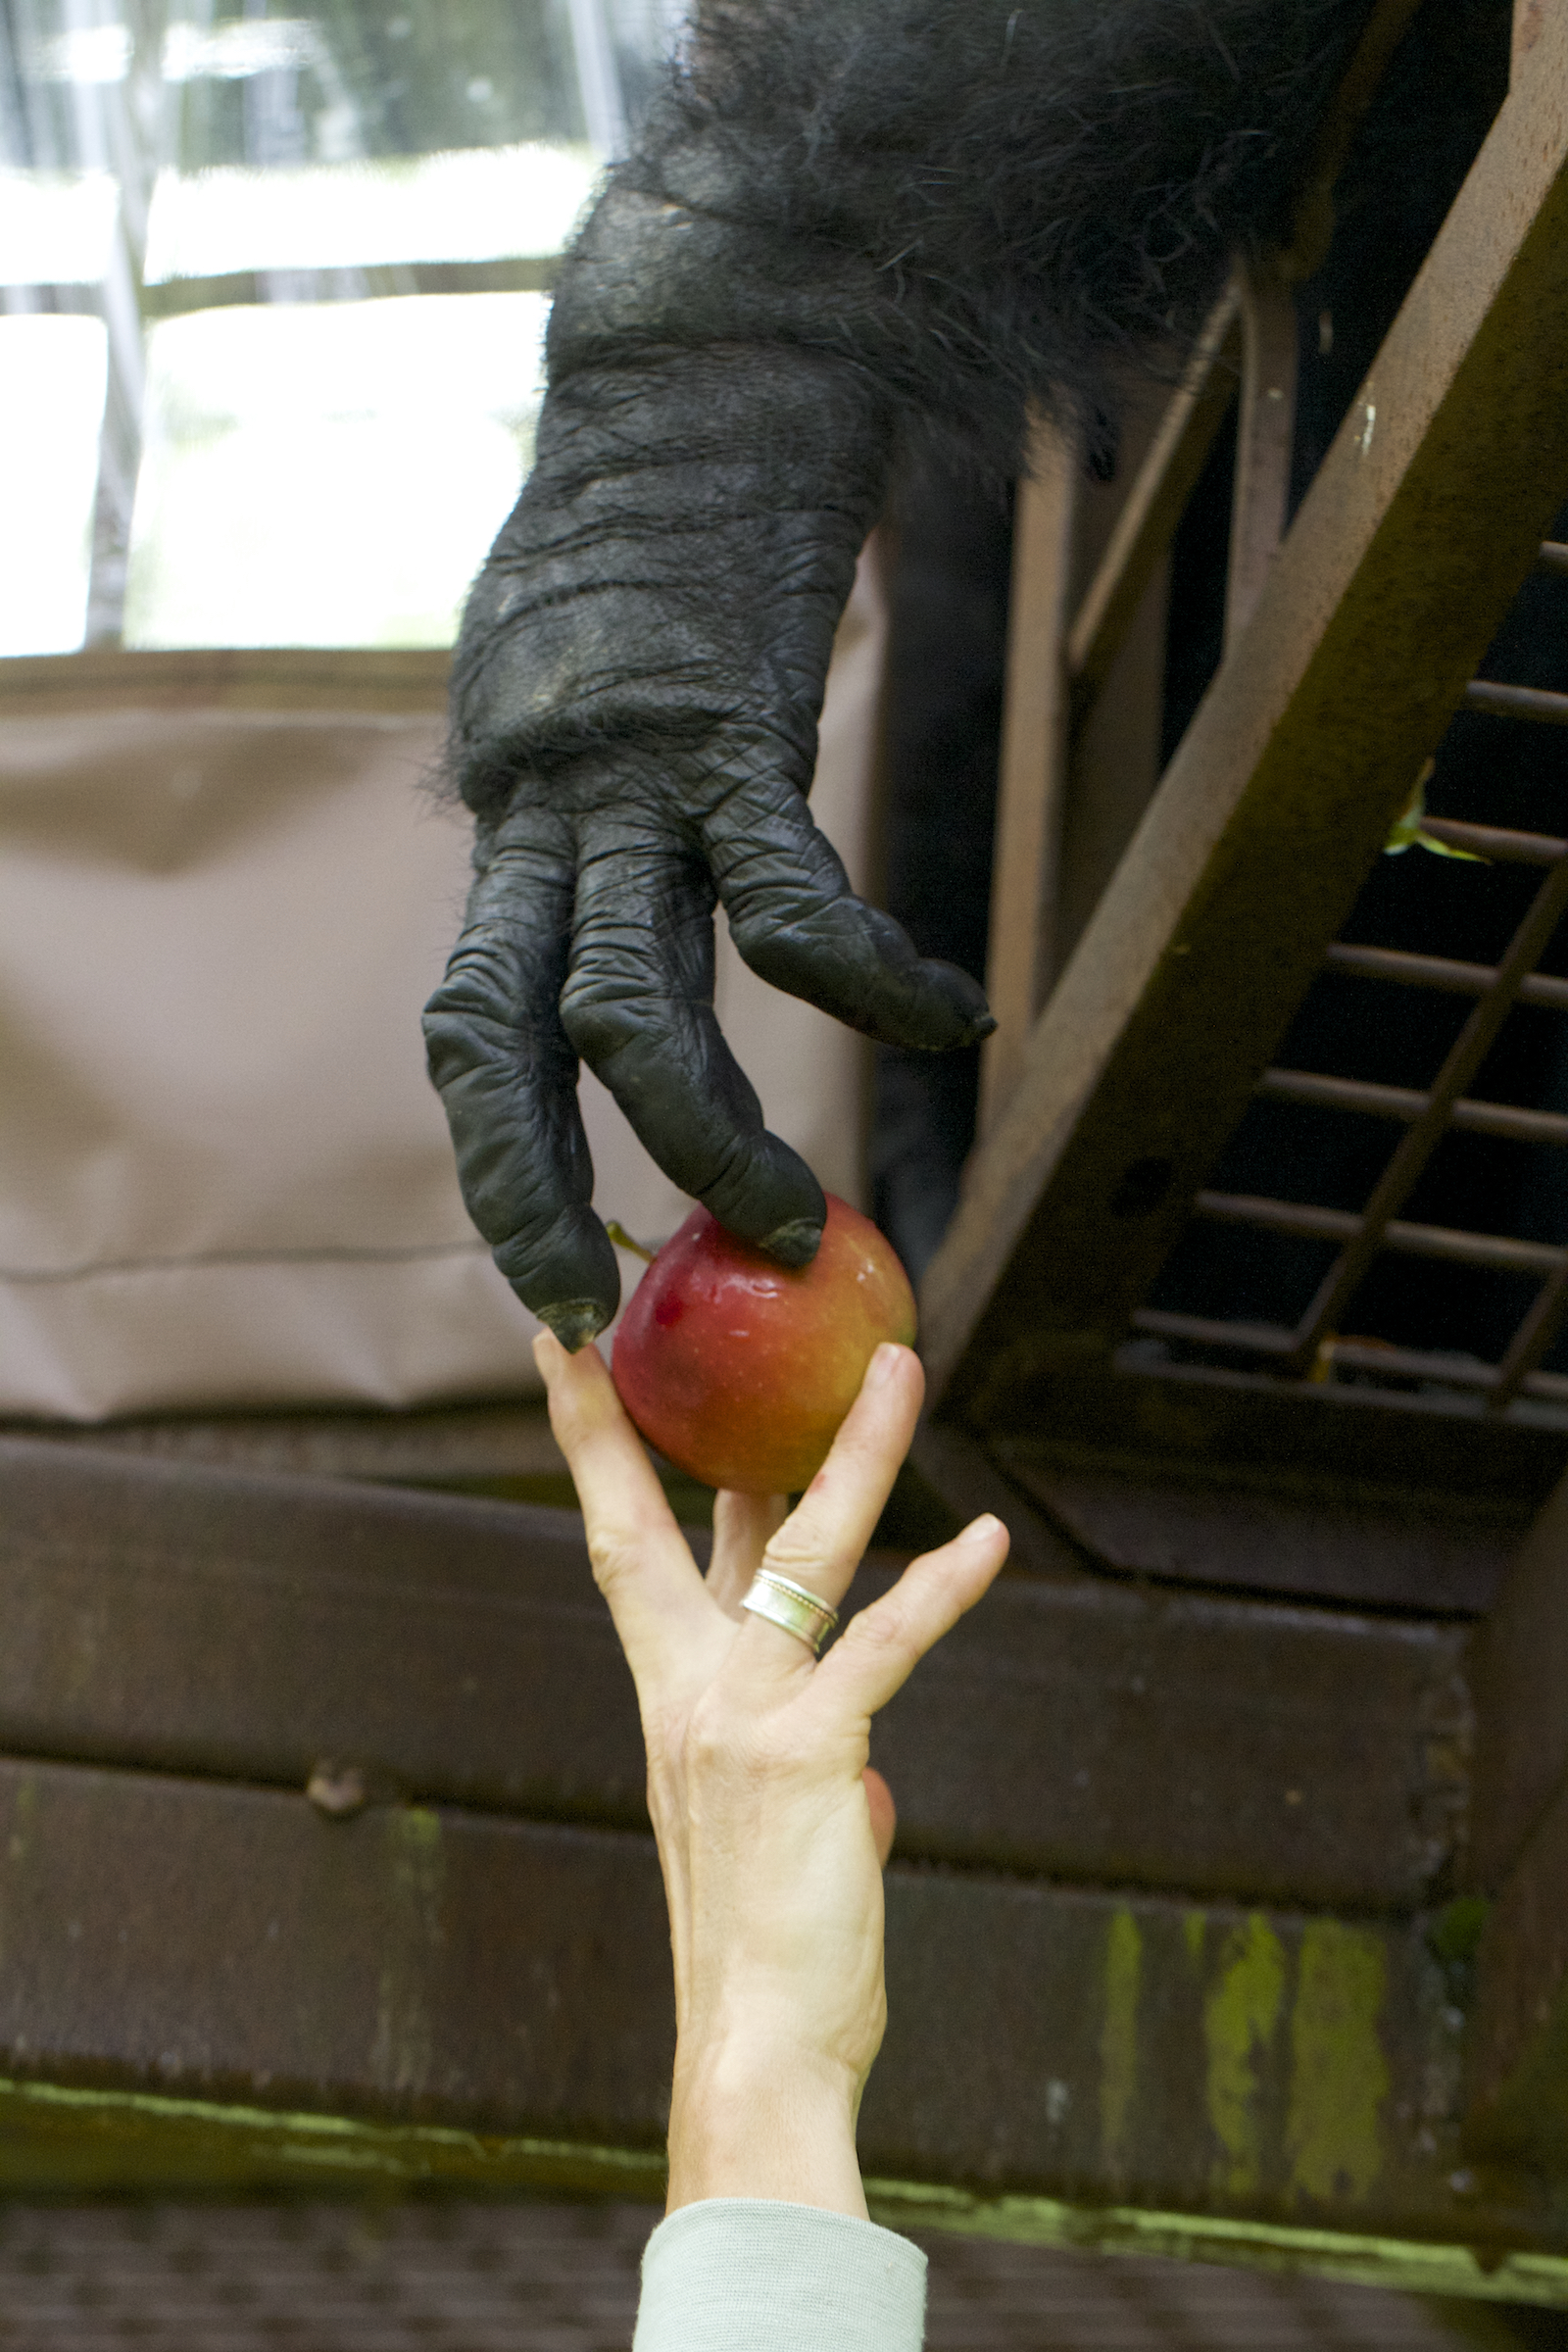 Founder Gloria grow handing an apple to a chimp. Photo by ©NJ Wight.